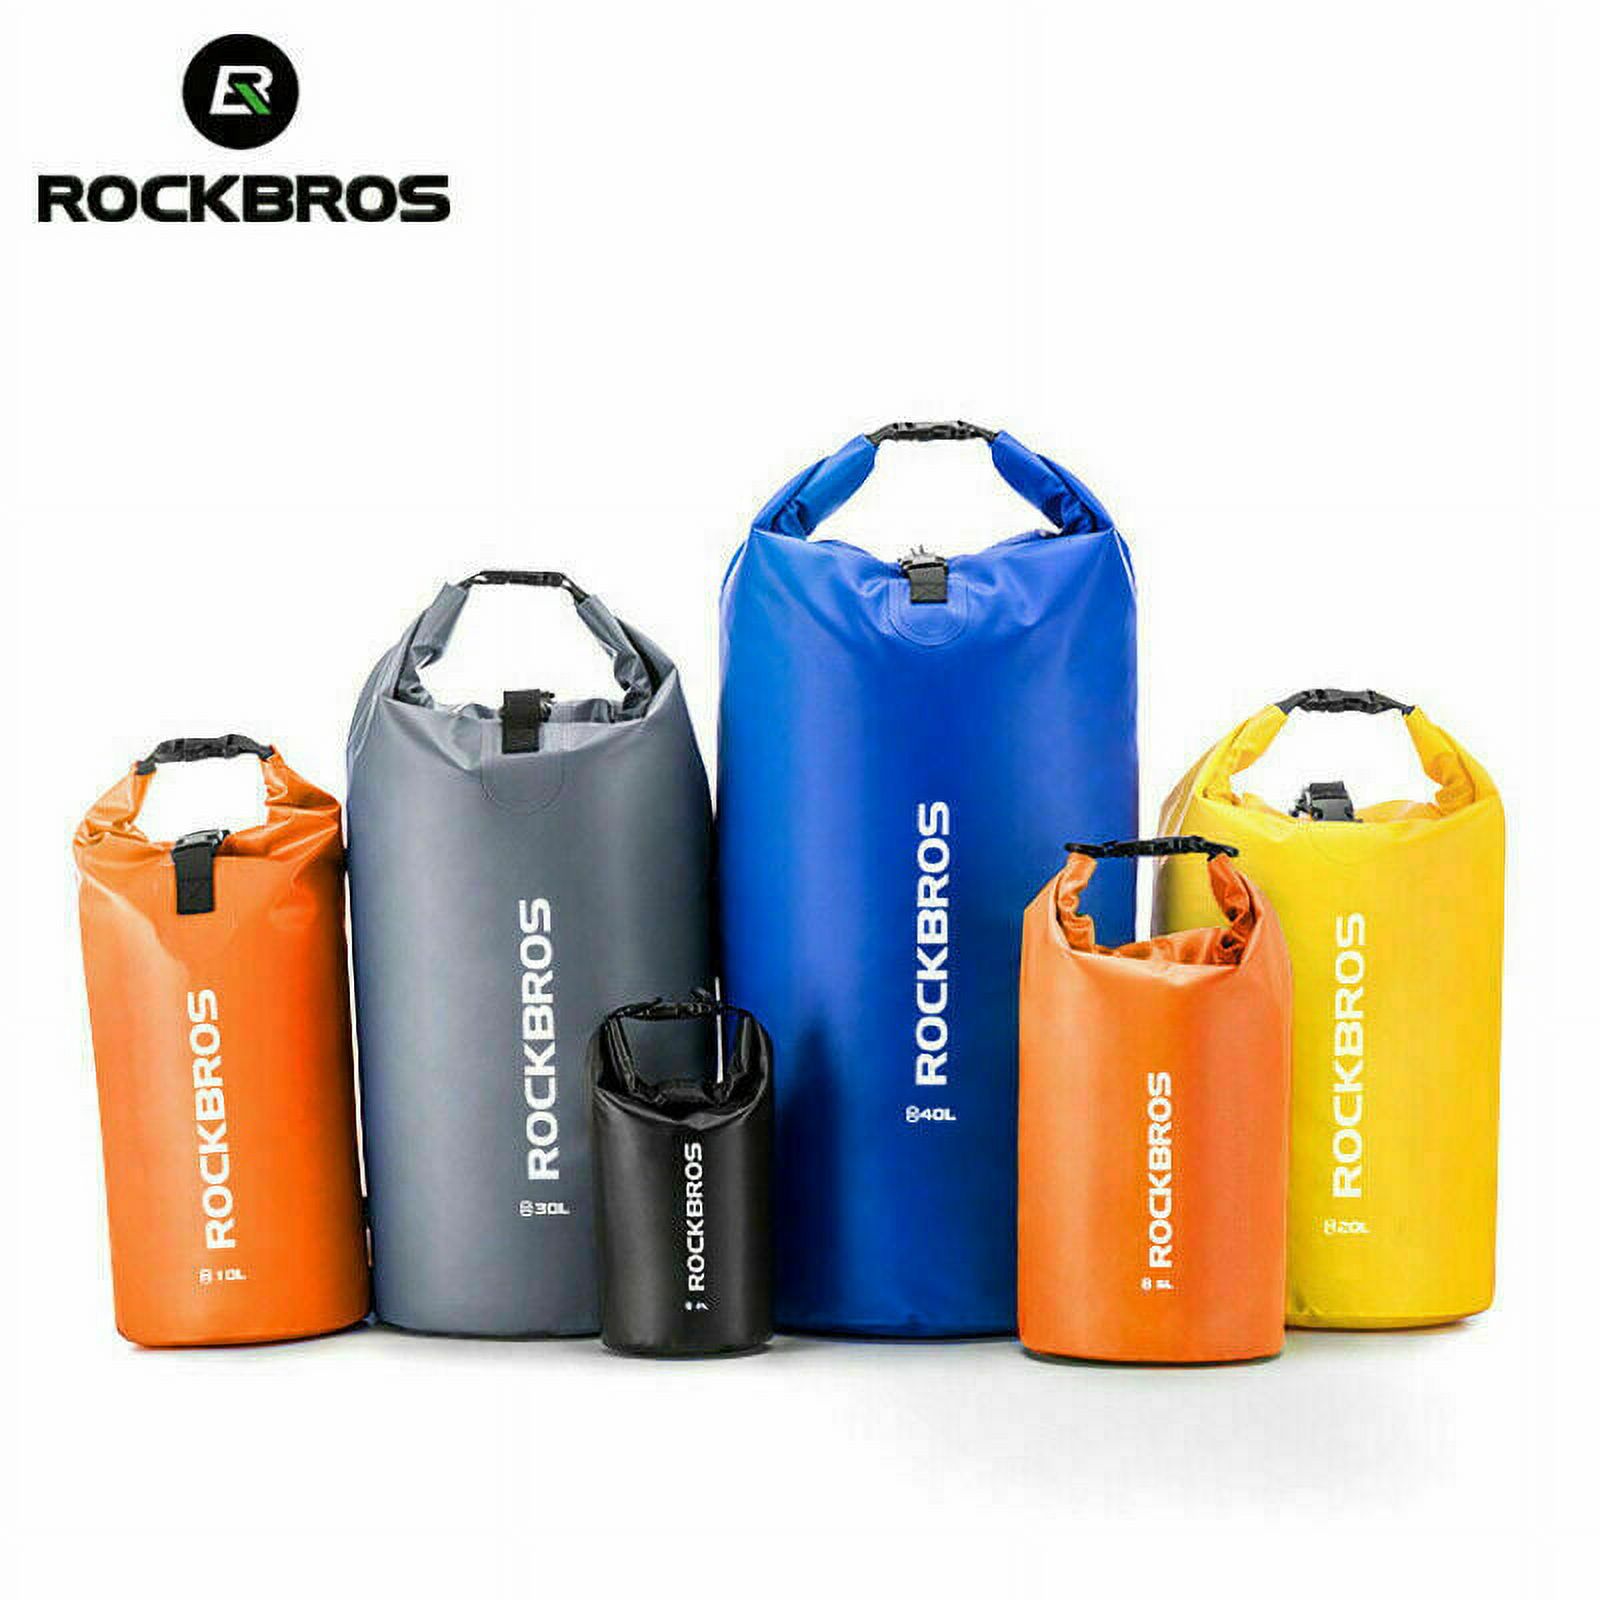 ROCKBROS 10L Valuables Watertight Dry Bags,Sacks Water Sport Bag, Weather Resistant Dry Bag Roll Top, Unisex, Yellow - image 3 of 11